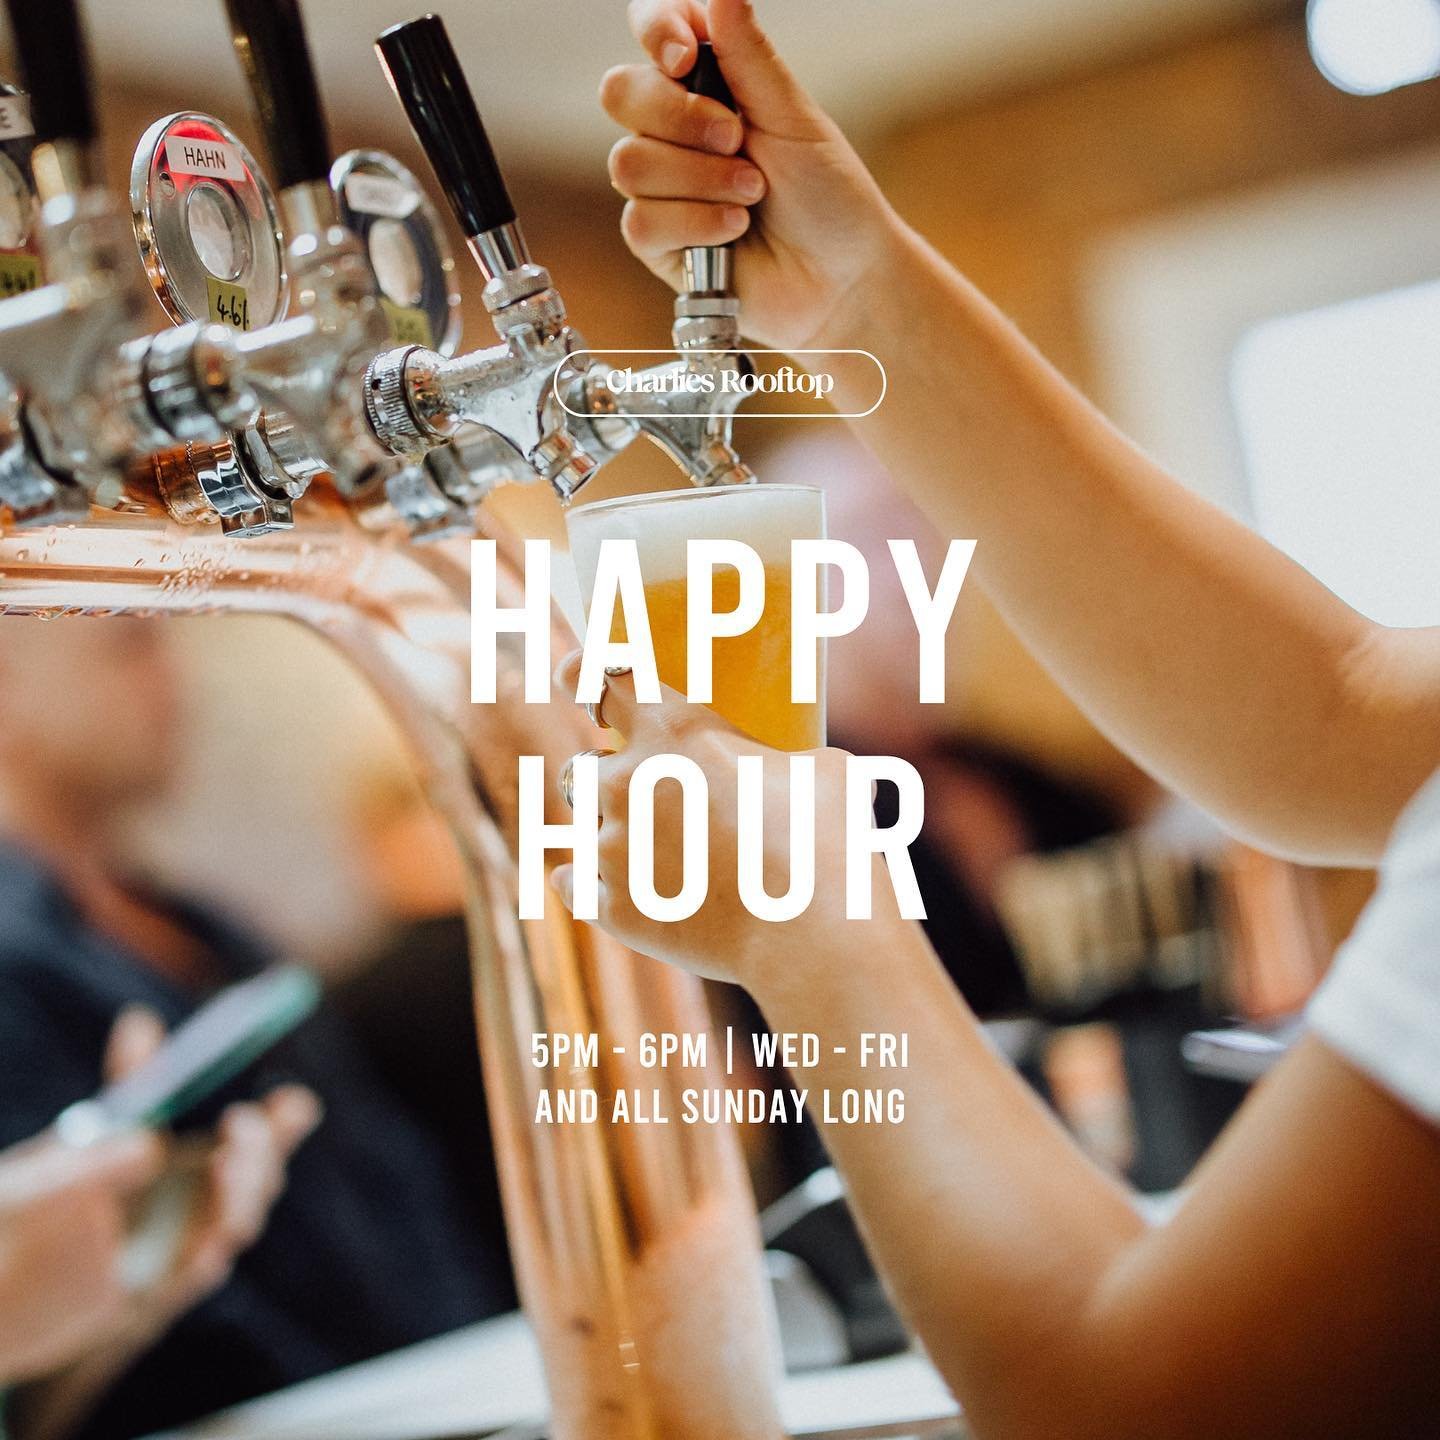 Charlie&rsquo;s has a happy hour that tastes like summer!
Wednesday to Friday, 5pm - 6pm and all day long on Sundays.